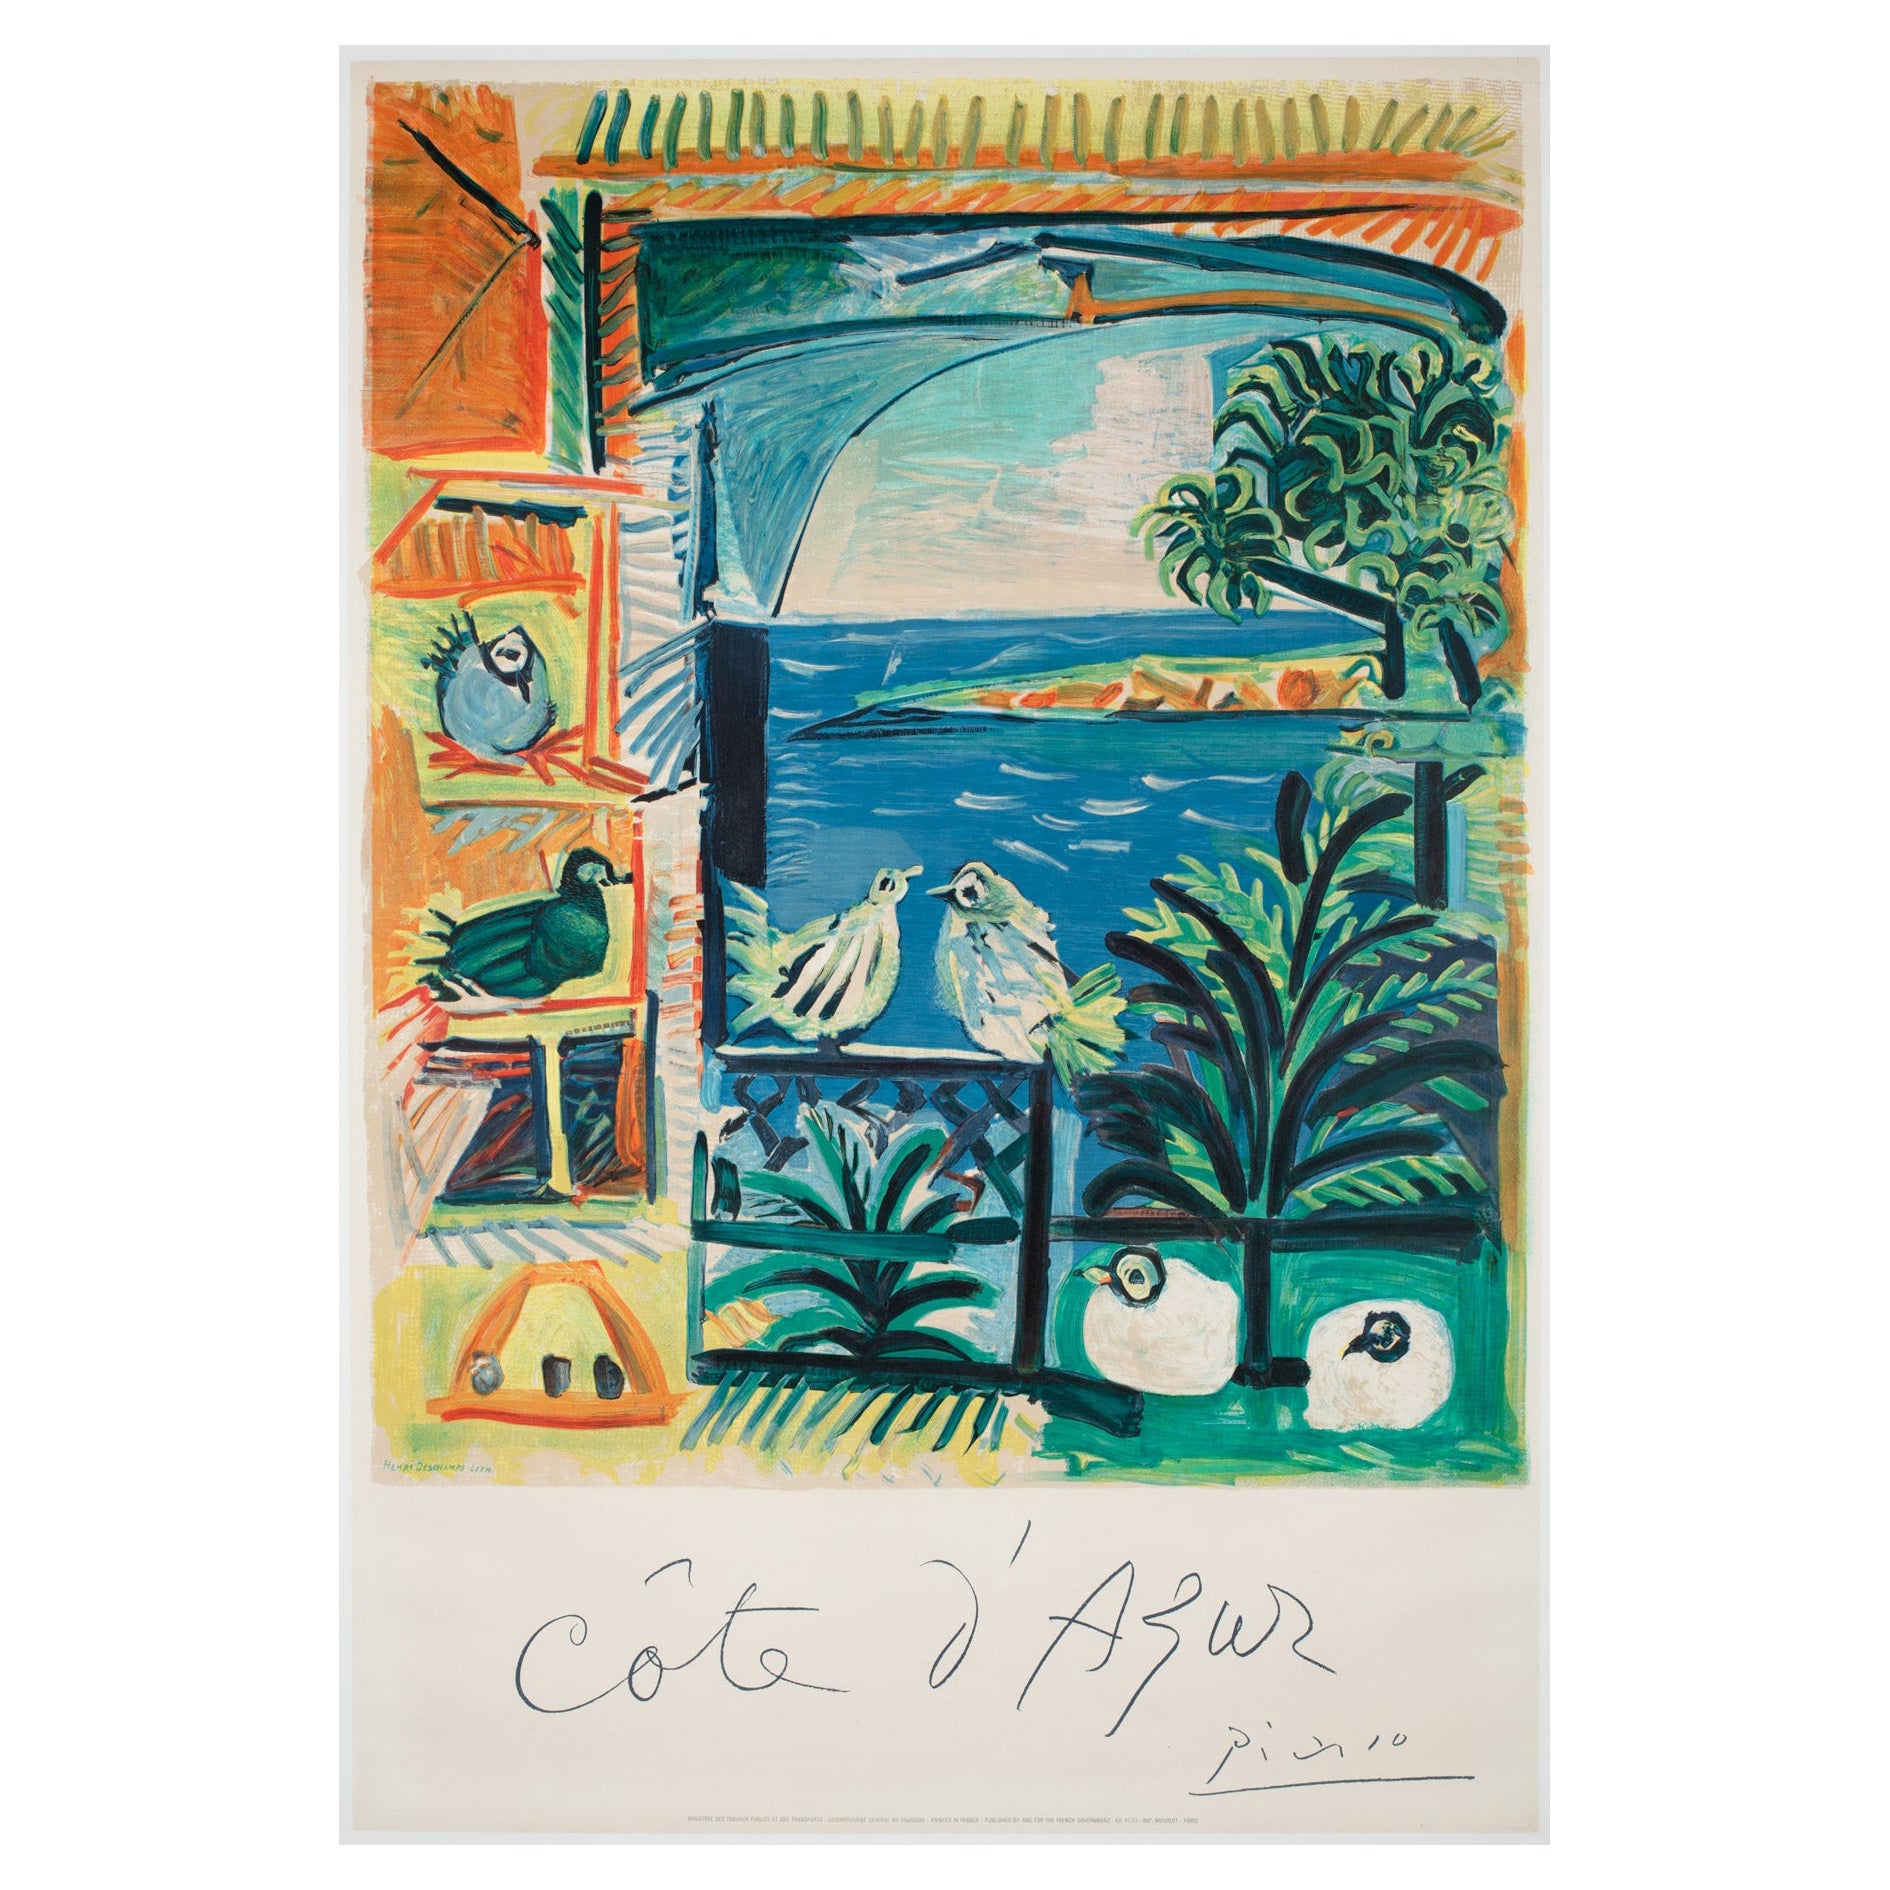 Cote D'Azur 1962 French Travel Advertising Poster, Pablo Picasso For Sale